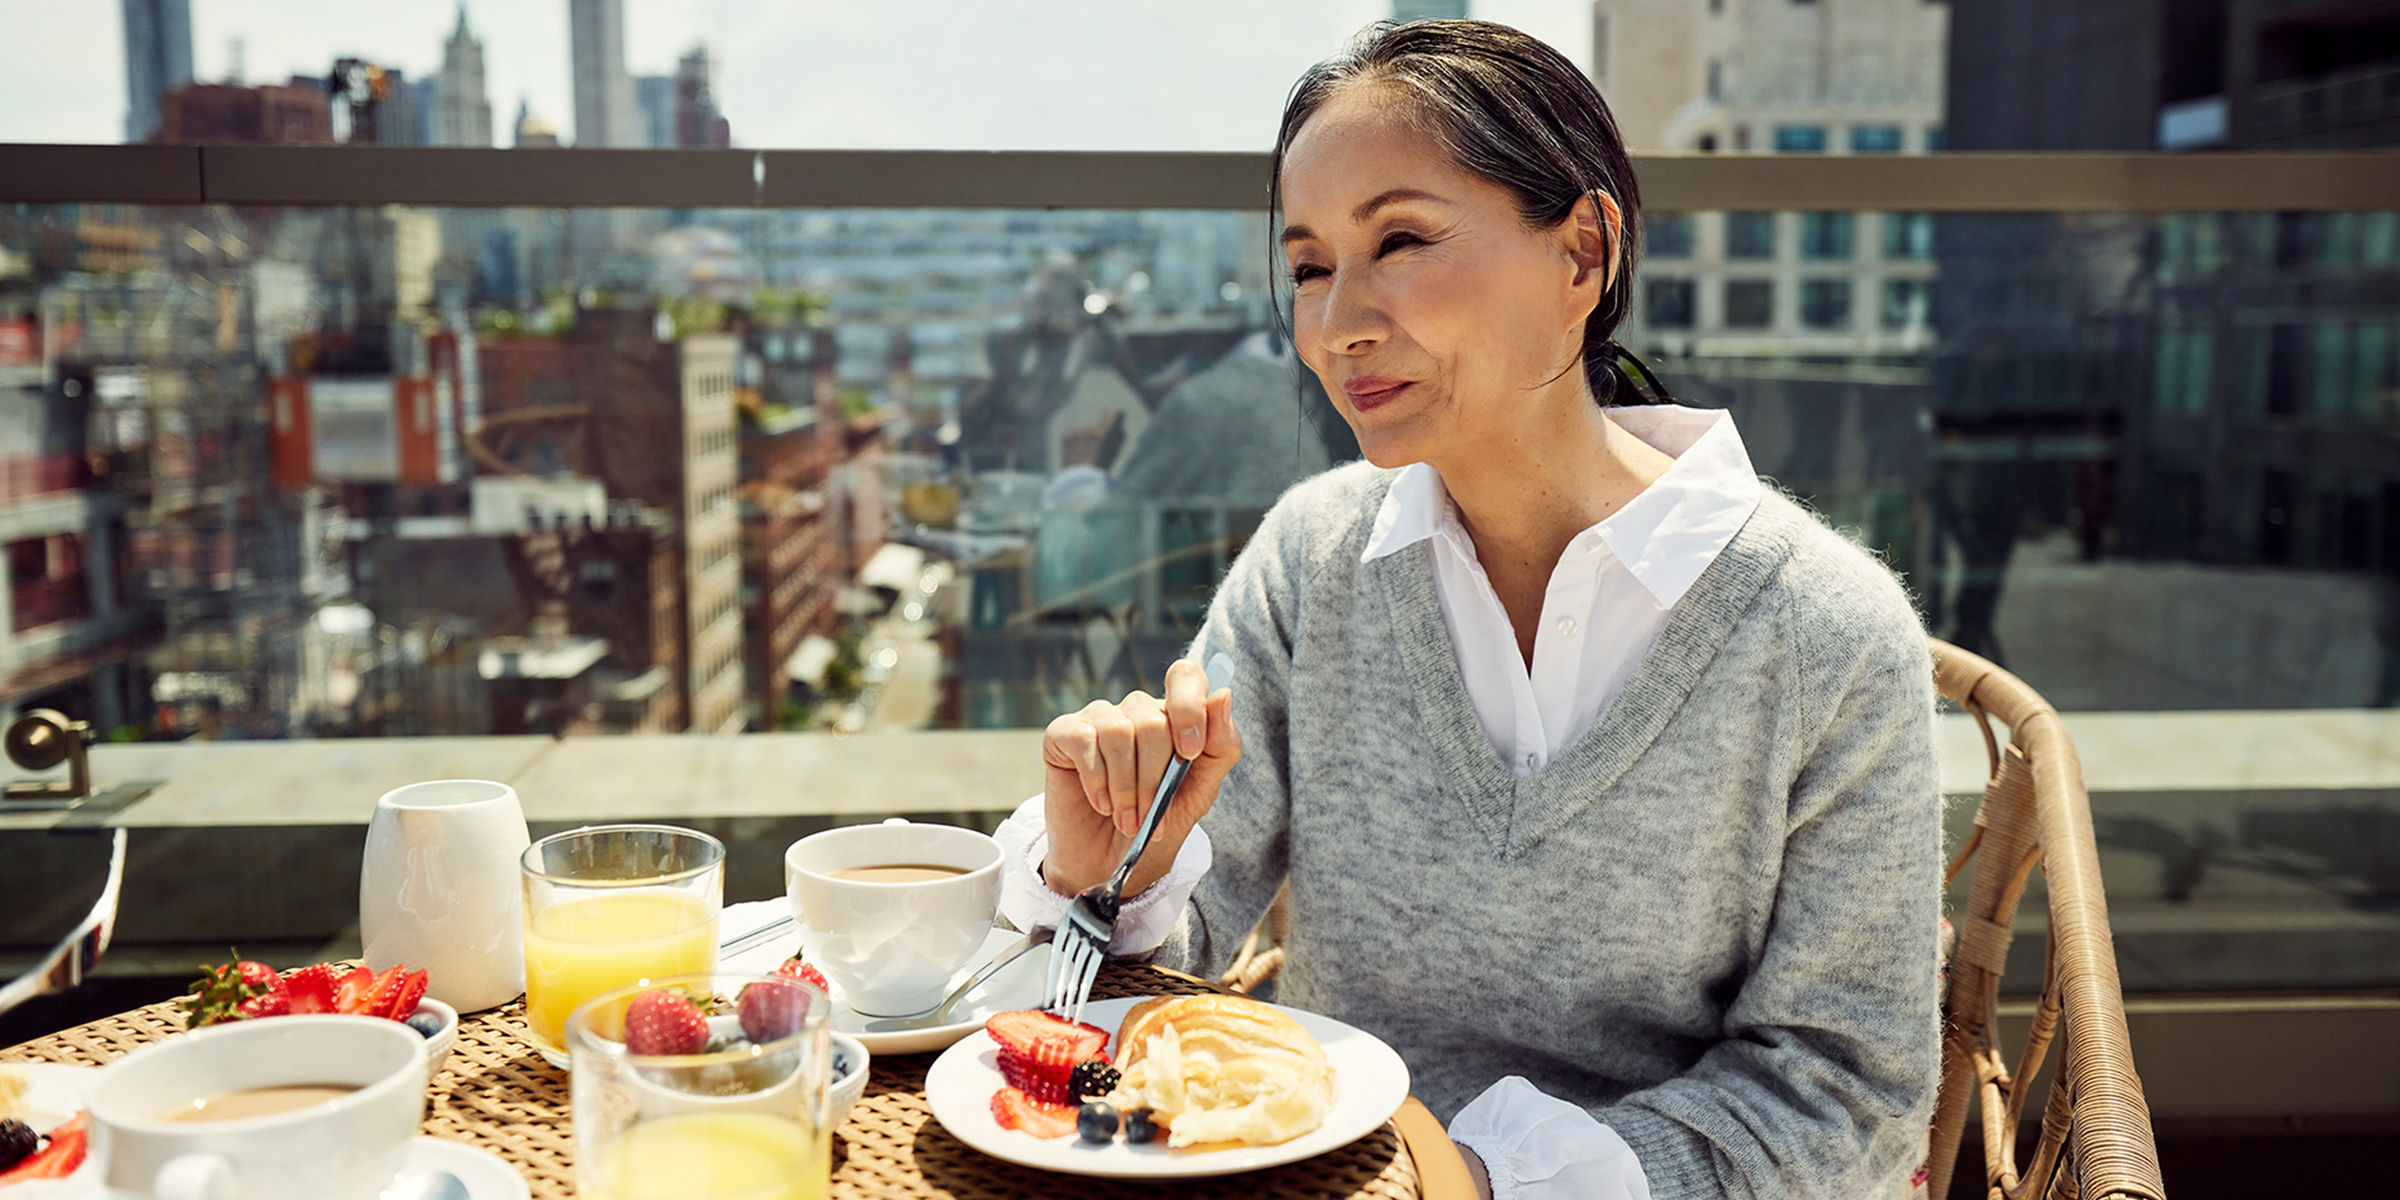 Older woman eating breakfast on the rooftop with the city skyline splayed out behind her